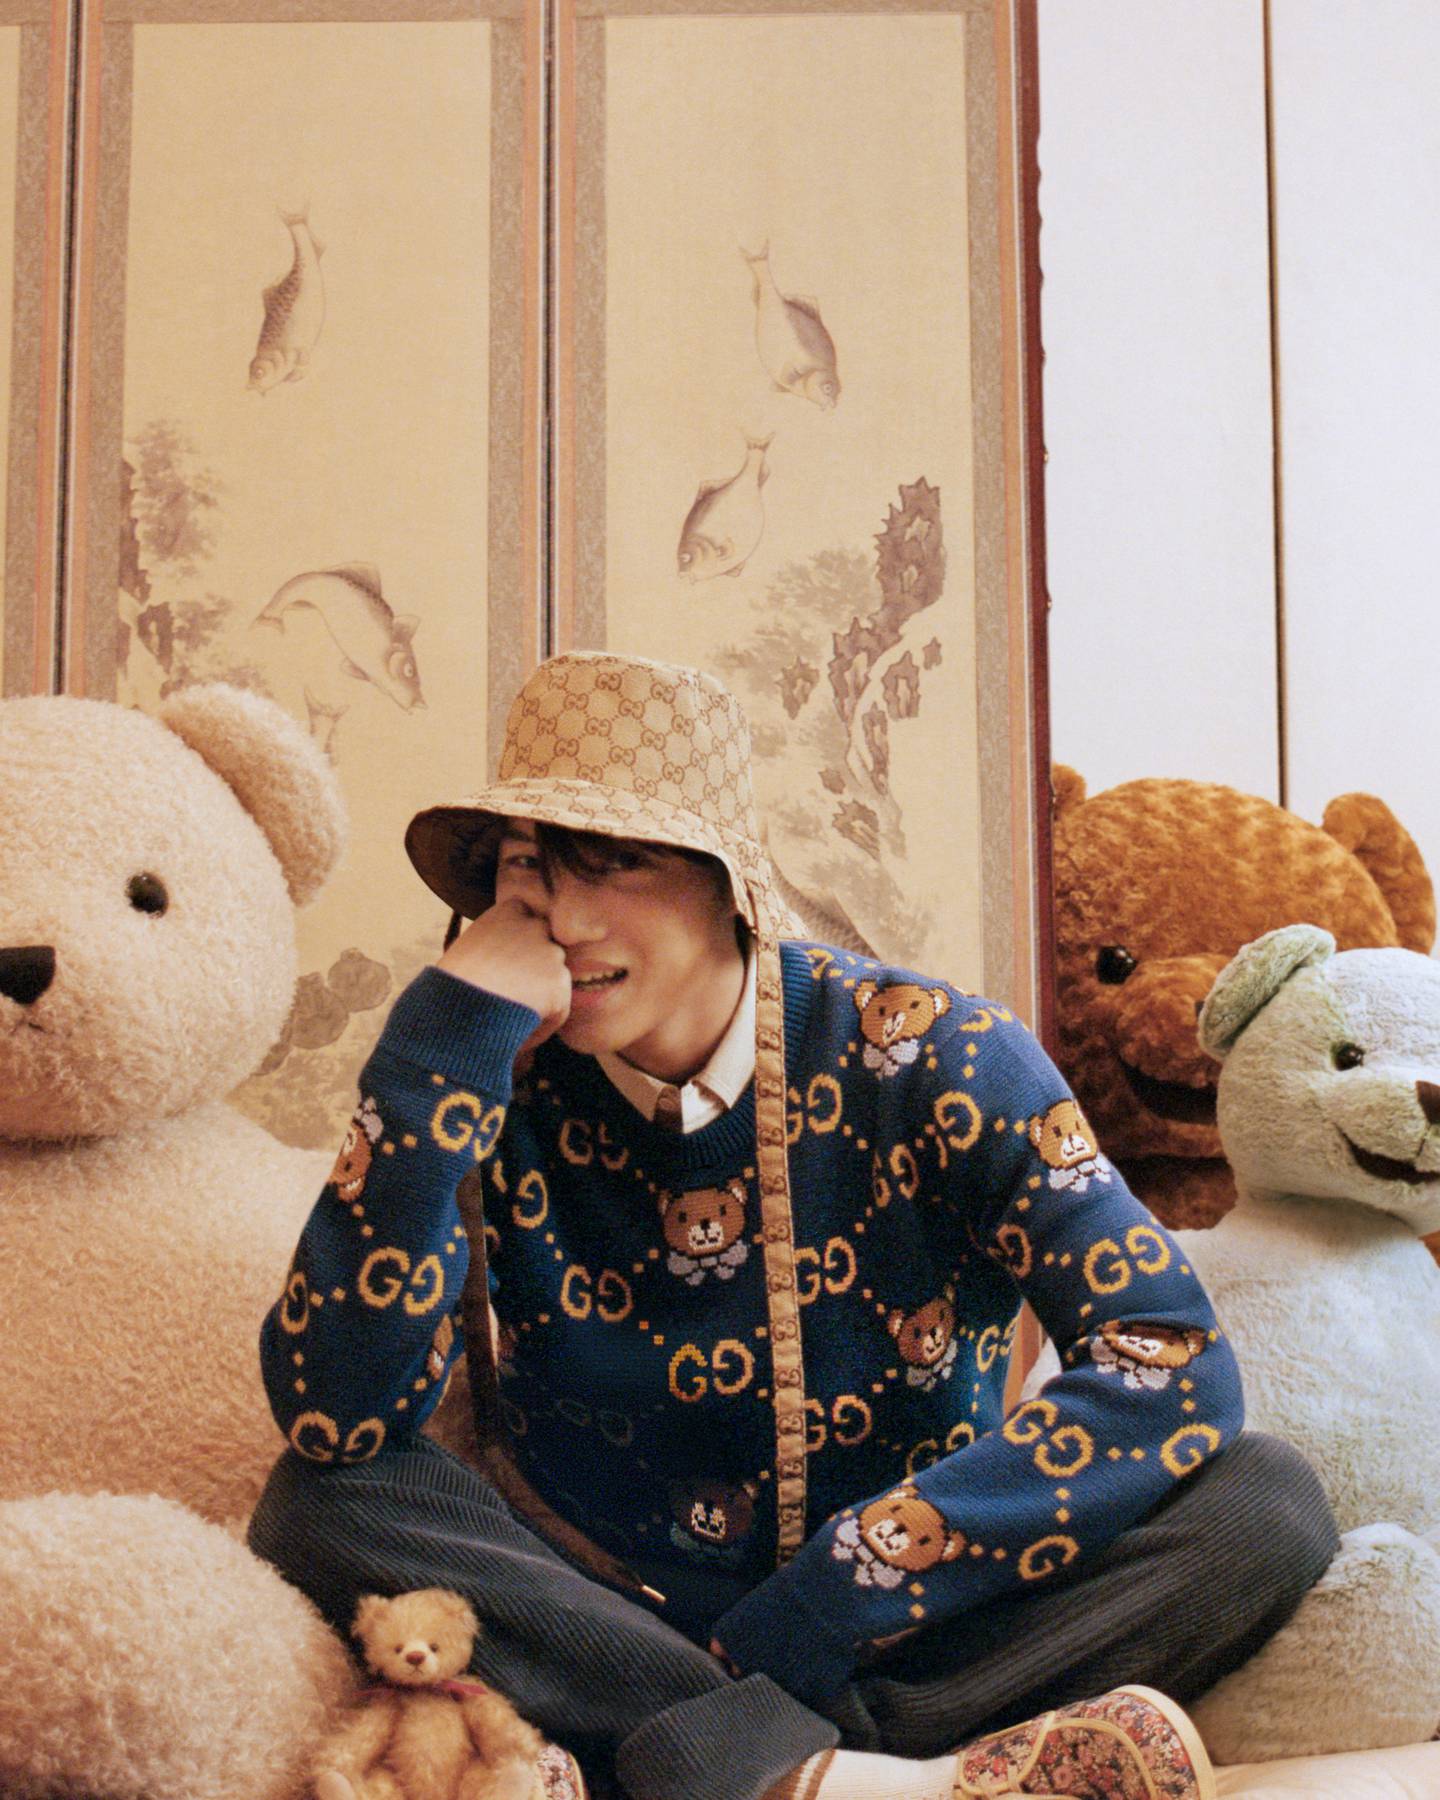 The sold-out Gucci x Kai teddy bear collection . Photo: Gucci